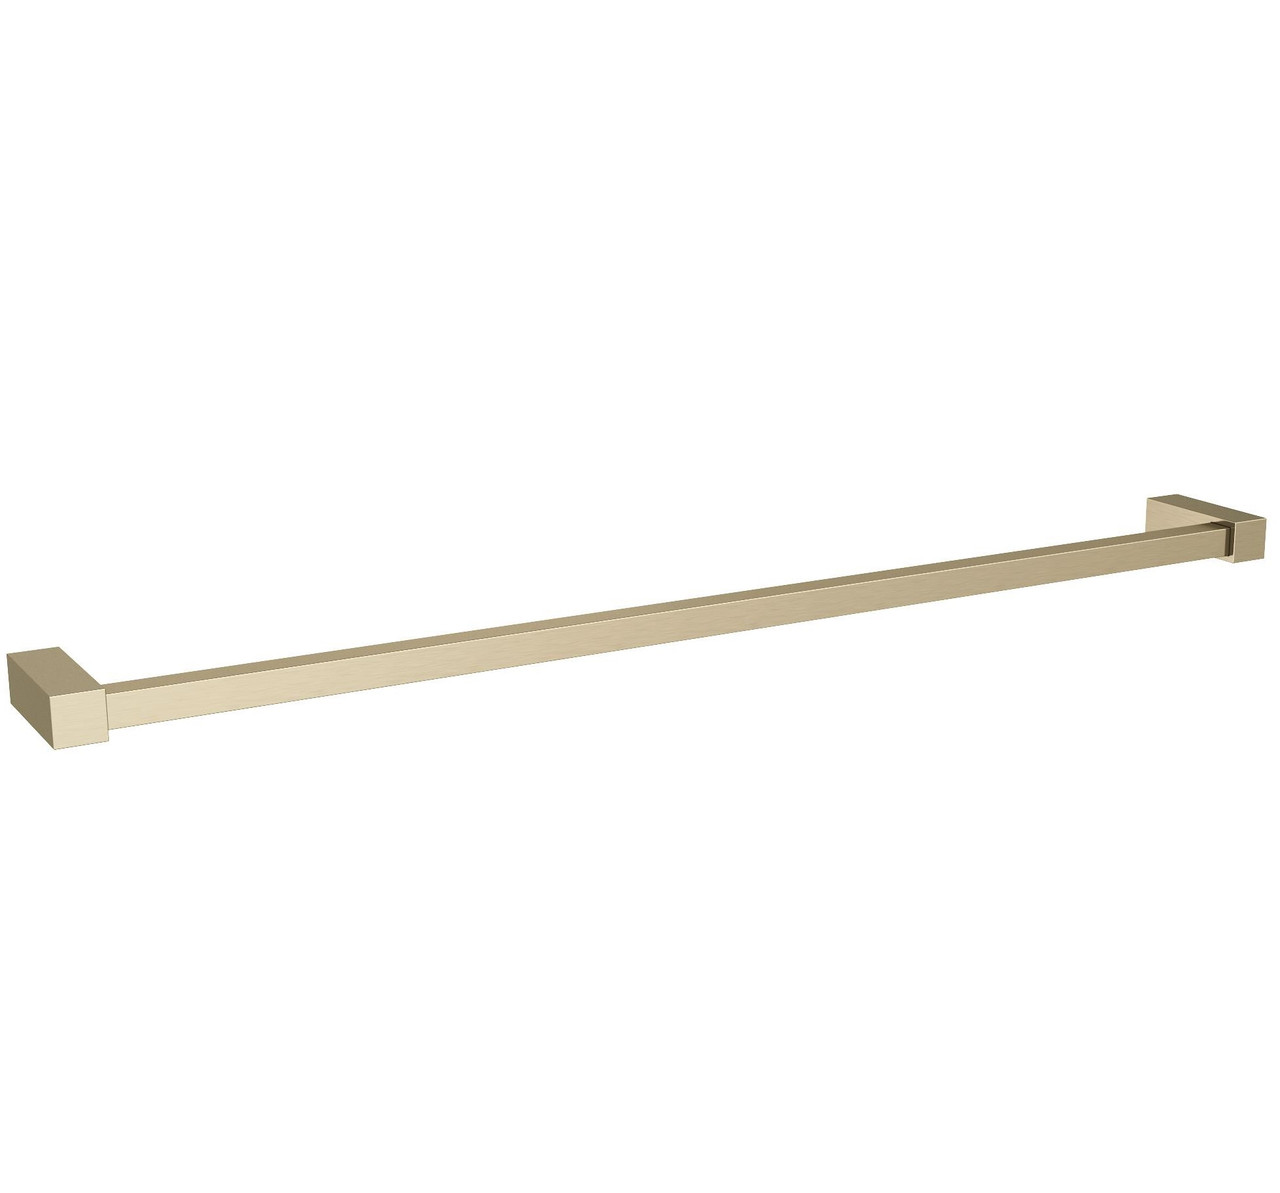 Amerock Monument Contemporary 24 in (610 mm) Towel Bar BH36084